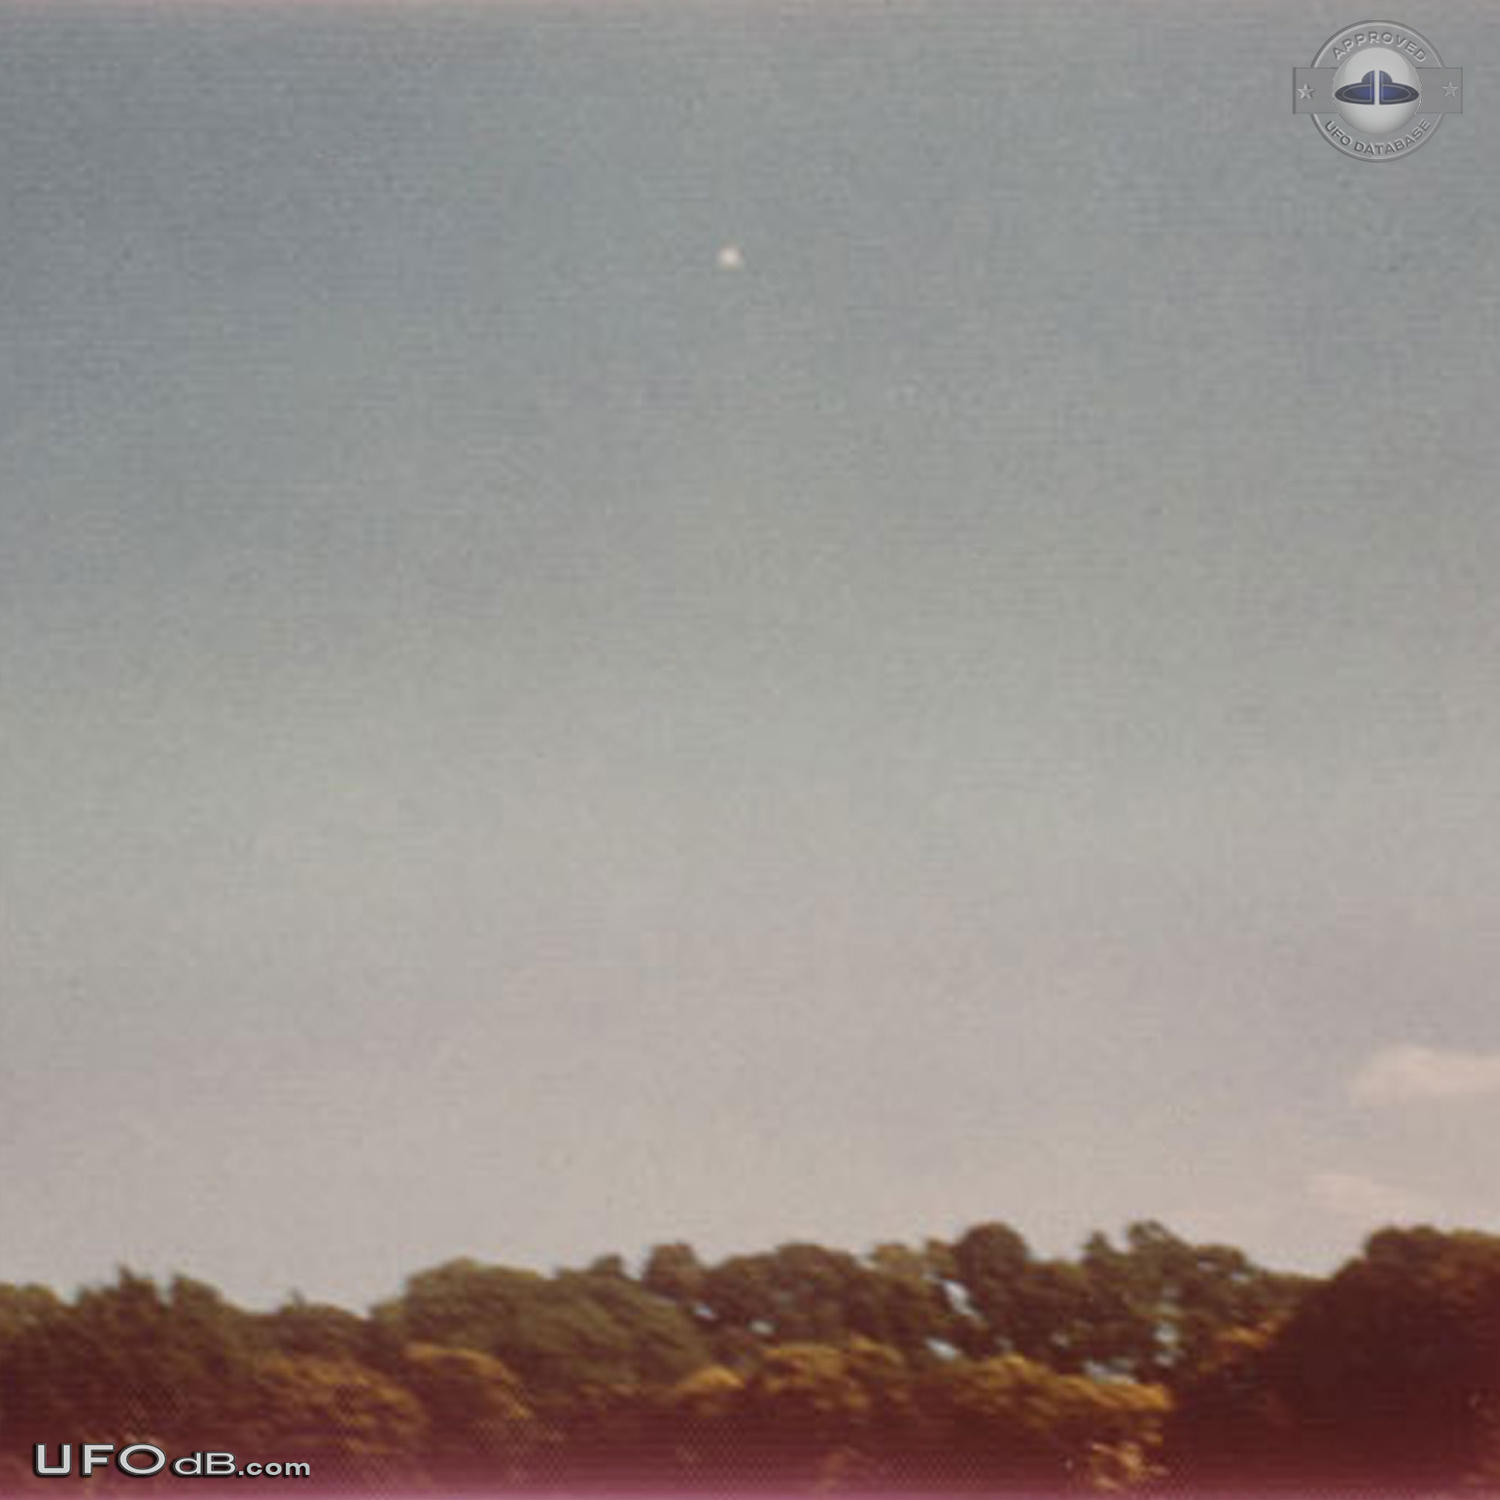 Famous Florida Uruguay UFO pictures sequence taken July 1977 UFO Picture #463-8